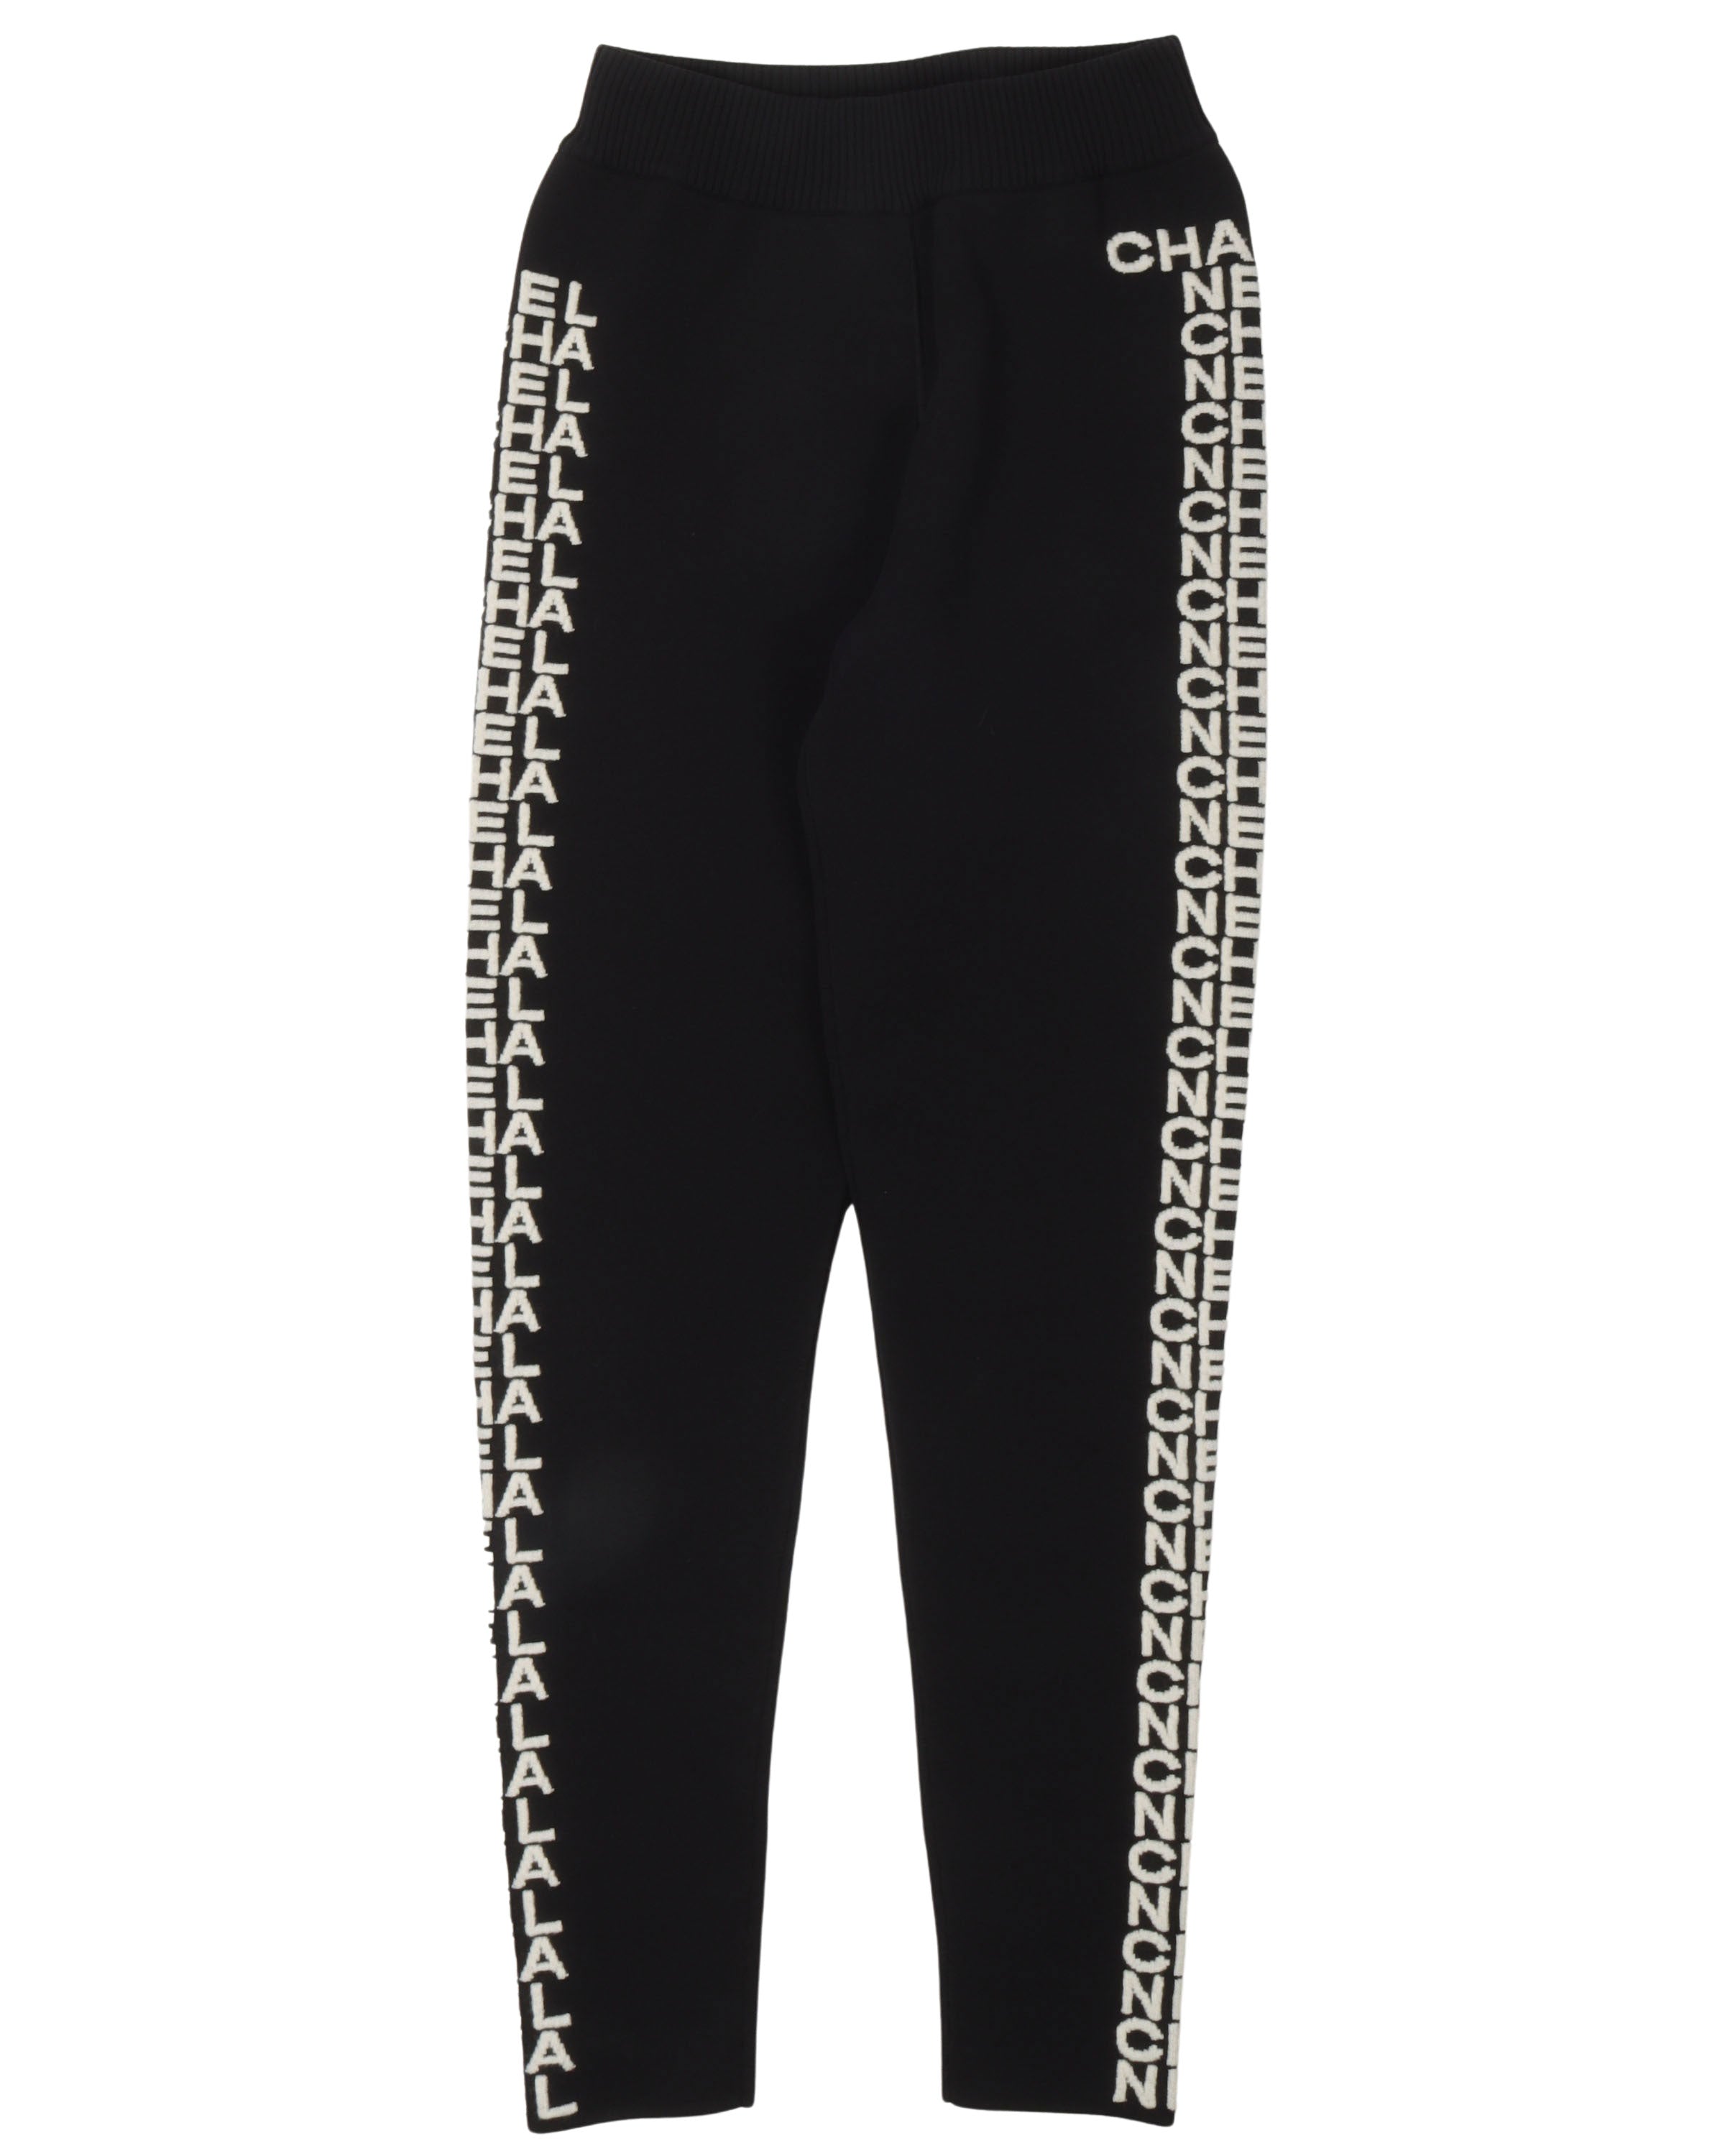 Chanel Embroidered Wool Blend Leggings